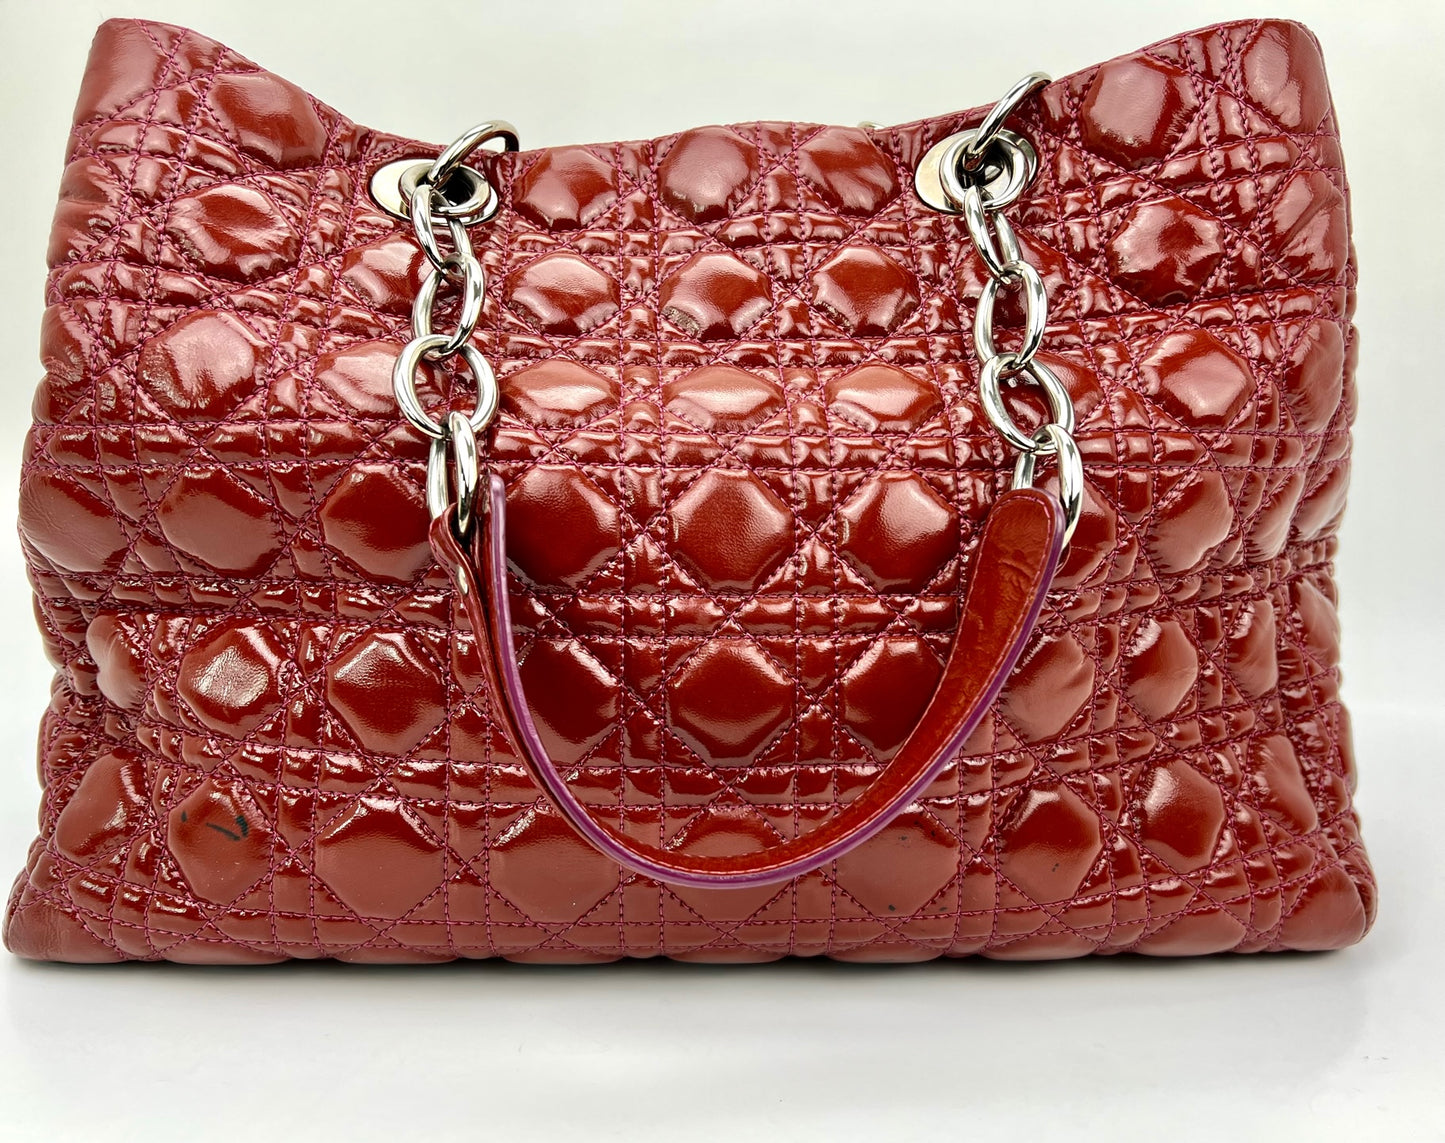 Dior - Authenticated Handbag - Patent Leather Pink for Women, Good Condition